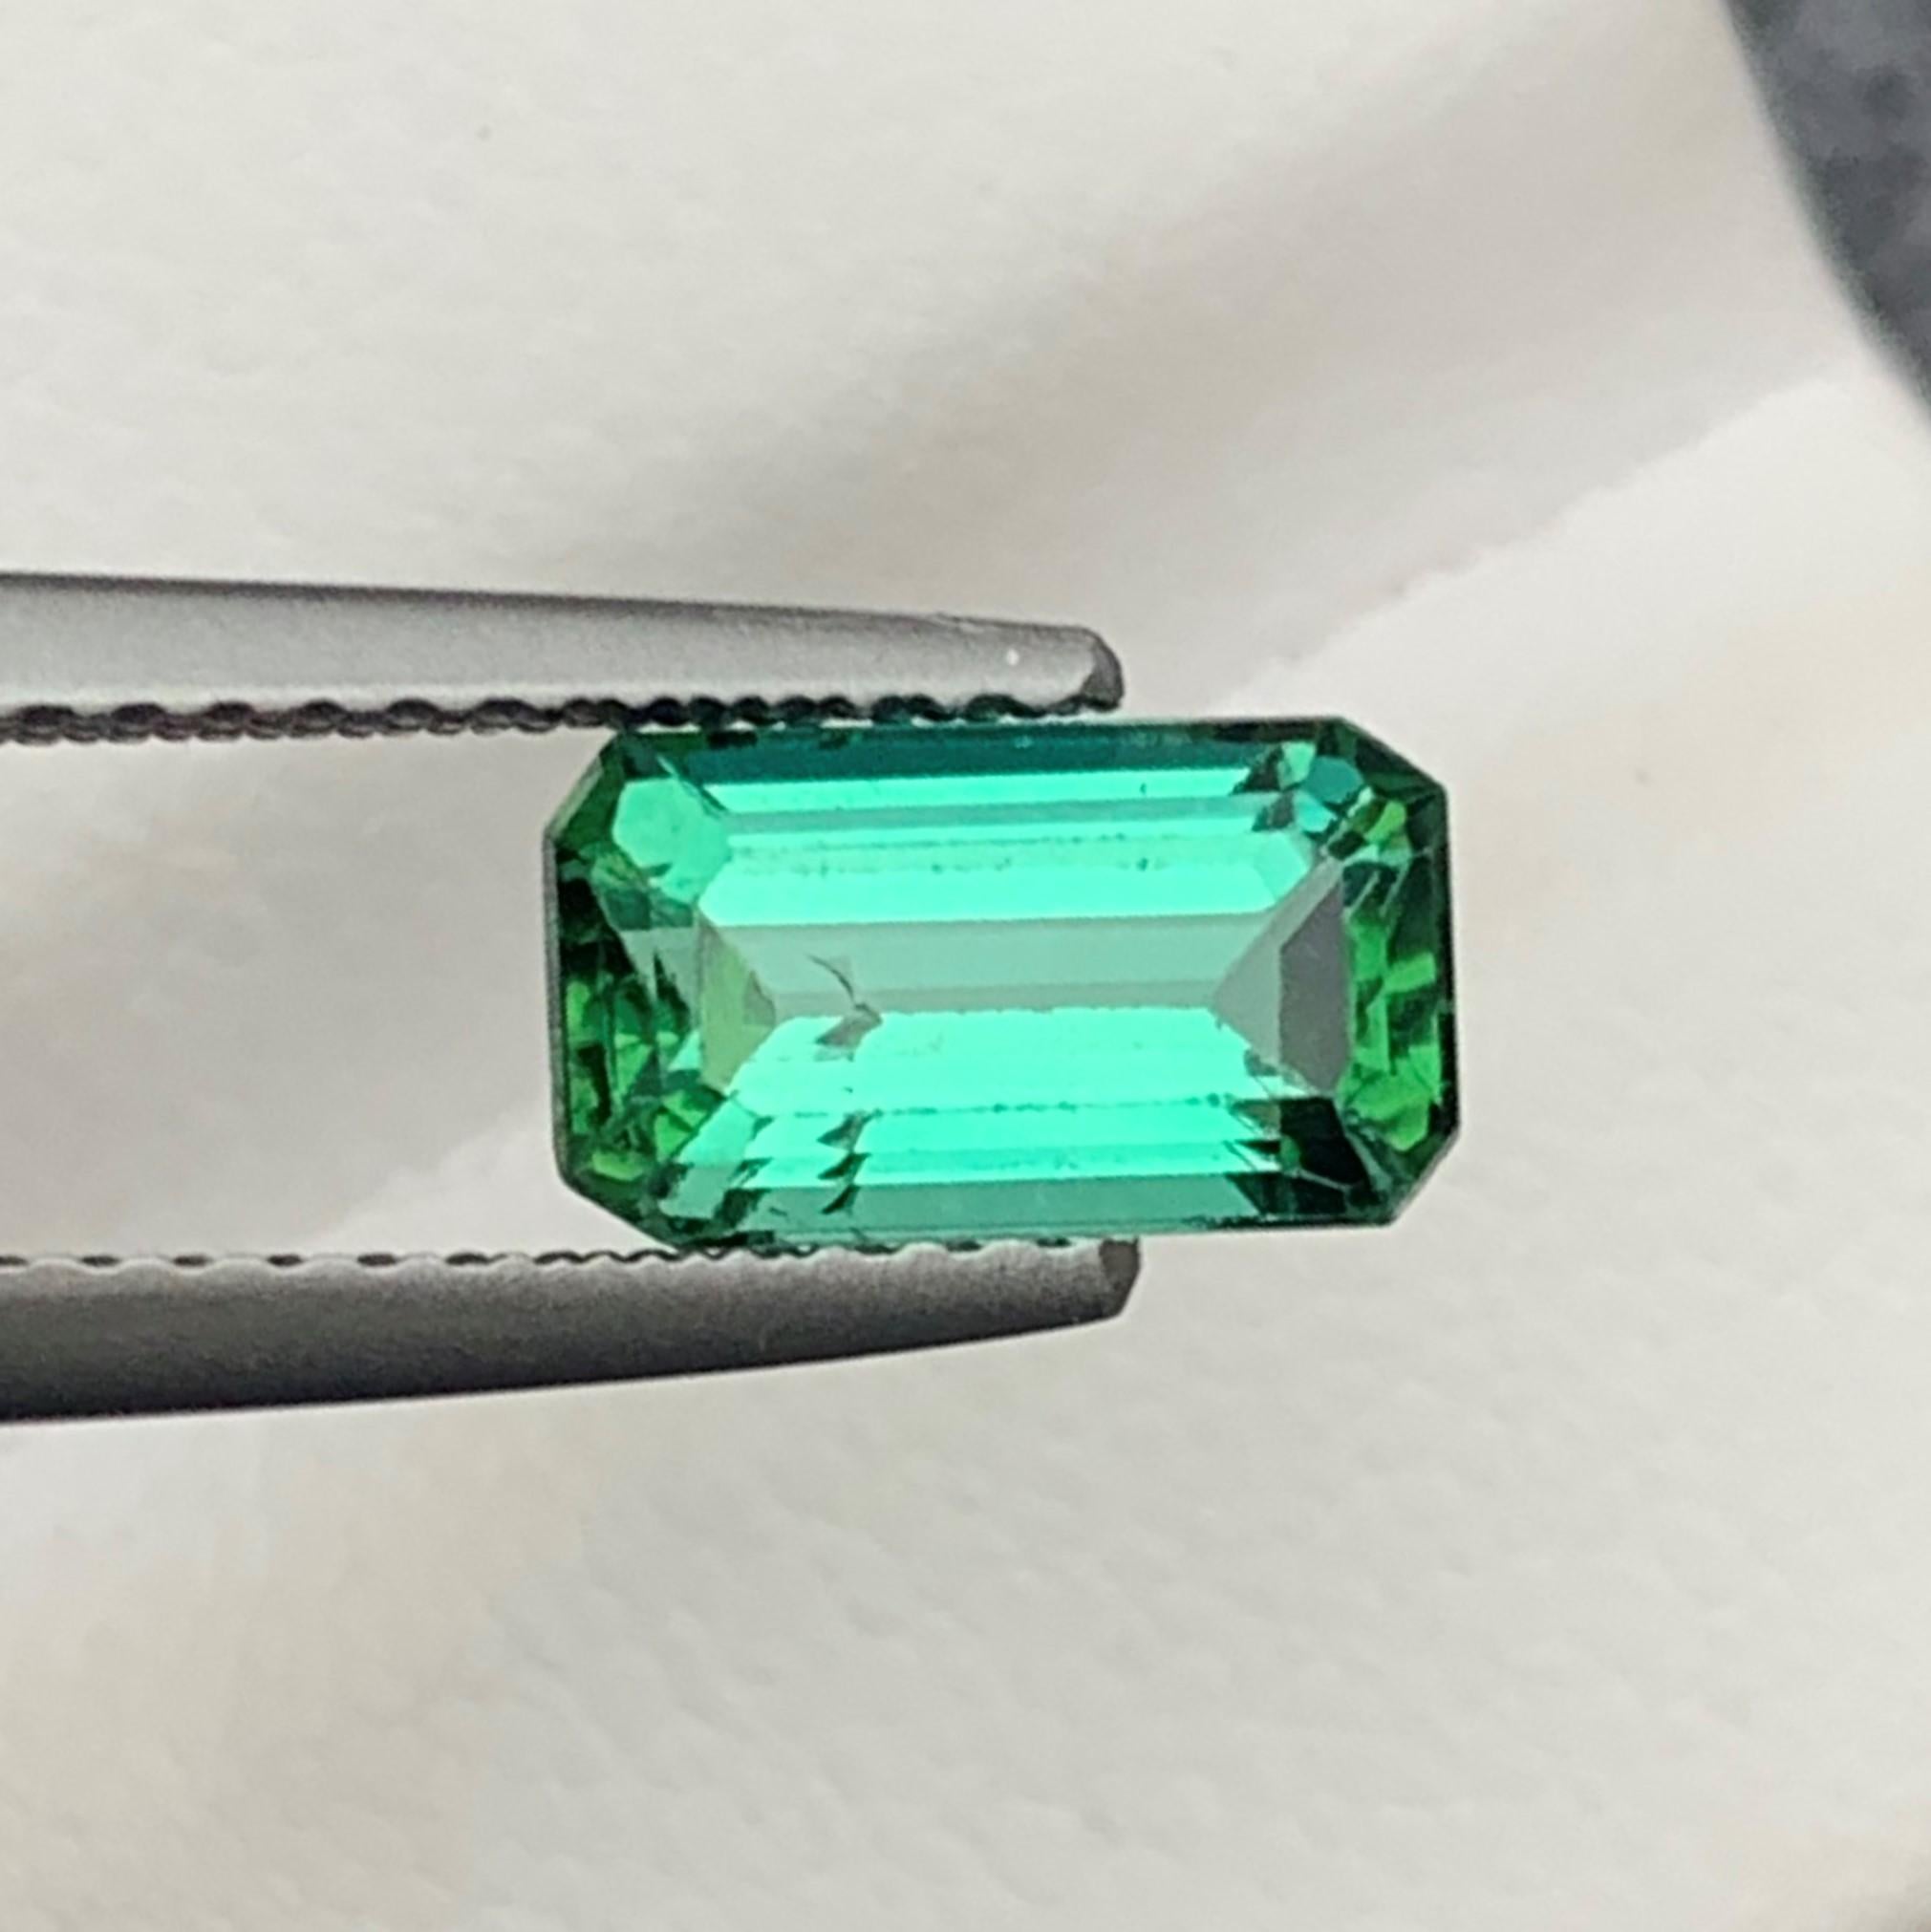 Gemstone Type : Tourmaline
Weight : 1.60 Carats
Dimensions : 8.7x5x4.1 Mm
Origin : Kunar Afghanistan
Clarity : SI
Shape: Emerald
Color: Lagoon
Certificate: On Demand
Basically, mint tourmalines are tourmalines with pastel hues of light green to